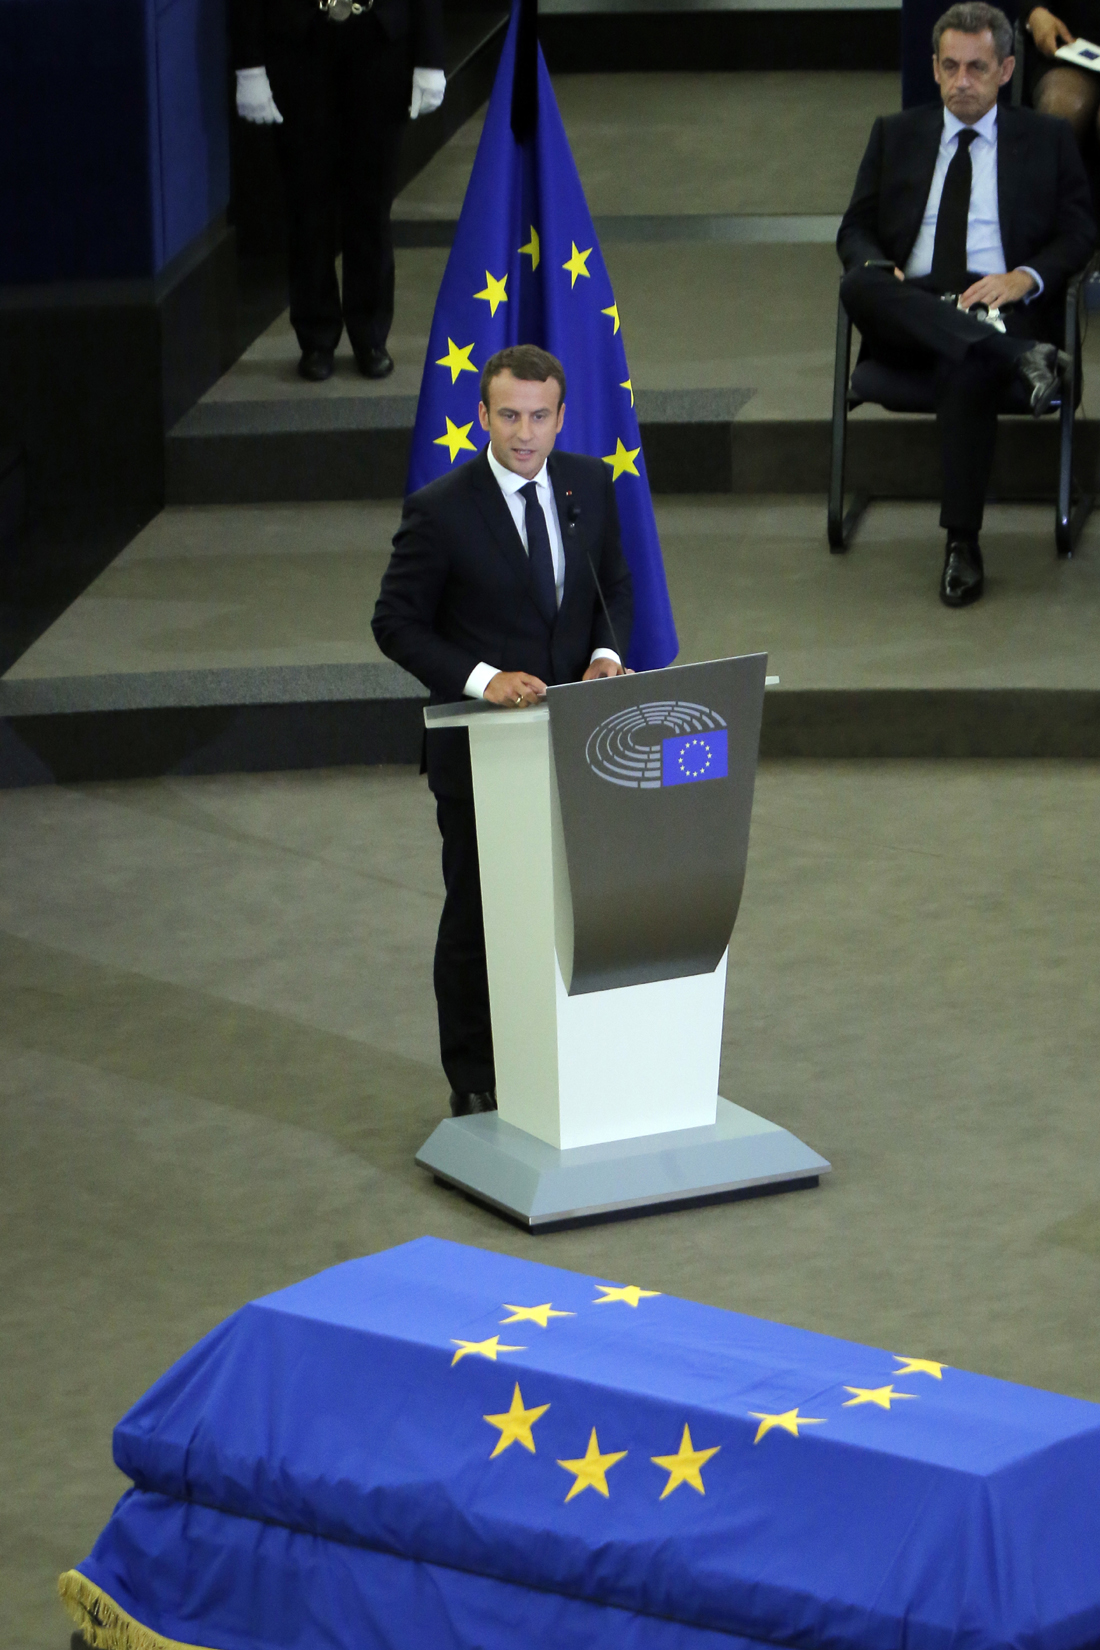 French President Emmanuel Macron delivers his speech during an homage ceremony for former German Chancellor Helmut Kohl, at the European Parliament in Strasbourg, eastern France, Saturday July 1, 2017. Current and former leaders from Europe and beyond are gathering in Strasbourg, France to bid farewell to former German Chancellor Helmut Kohl, who died June 16 at 87. [Photo: AP/Michel Euler]